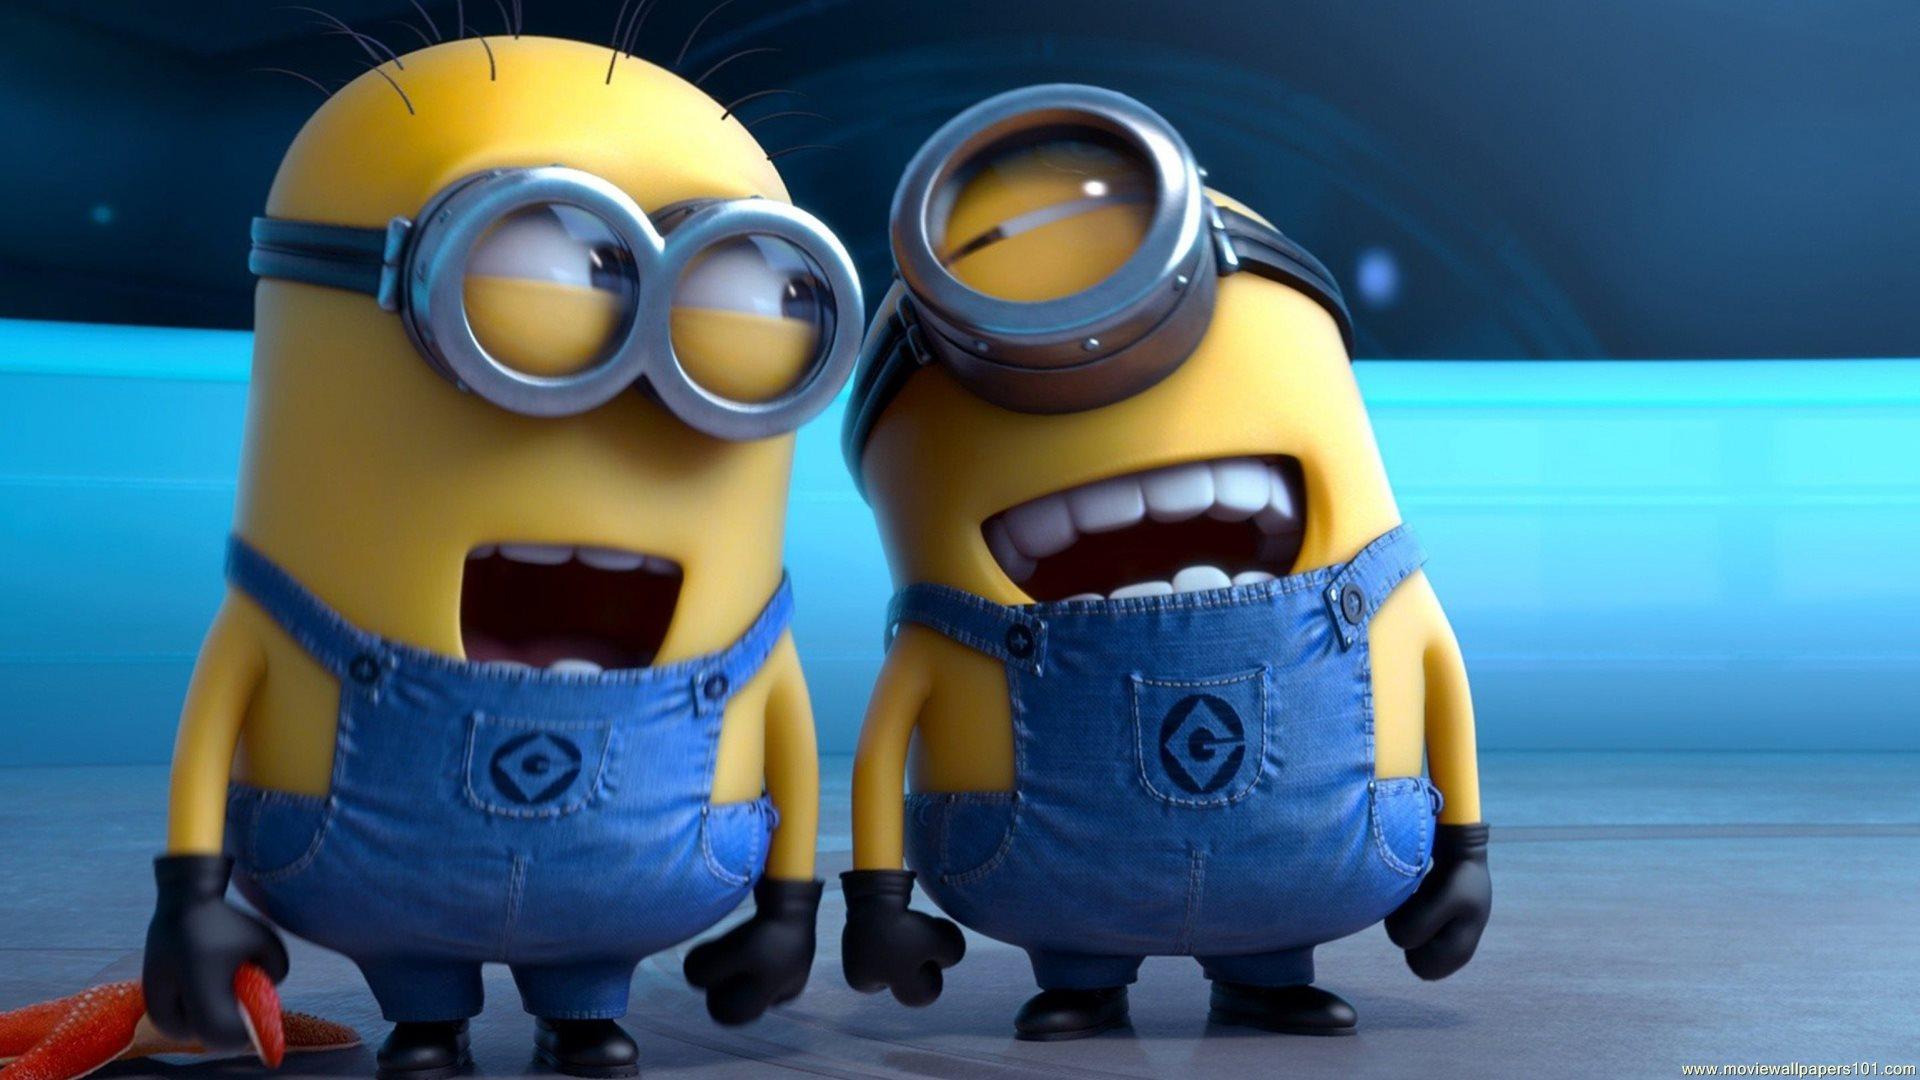 Movie Minions Bob Stuart Kevin HD Wallpaper Background Paper Print  Movies  posters in India  Buy art film design movie music nature and  educational paintingswallpapers at Flipkartcom